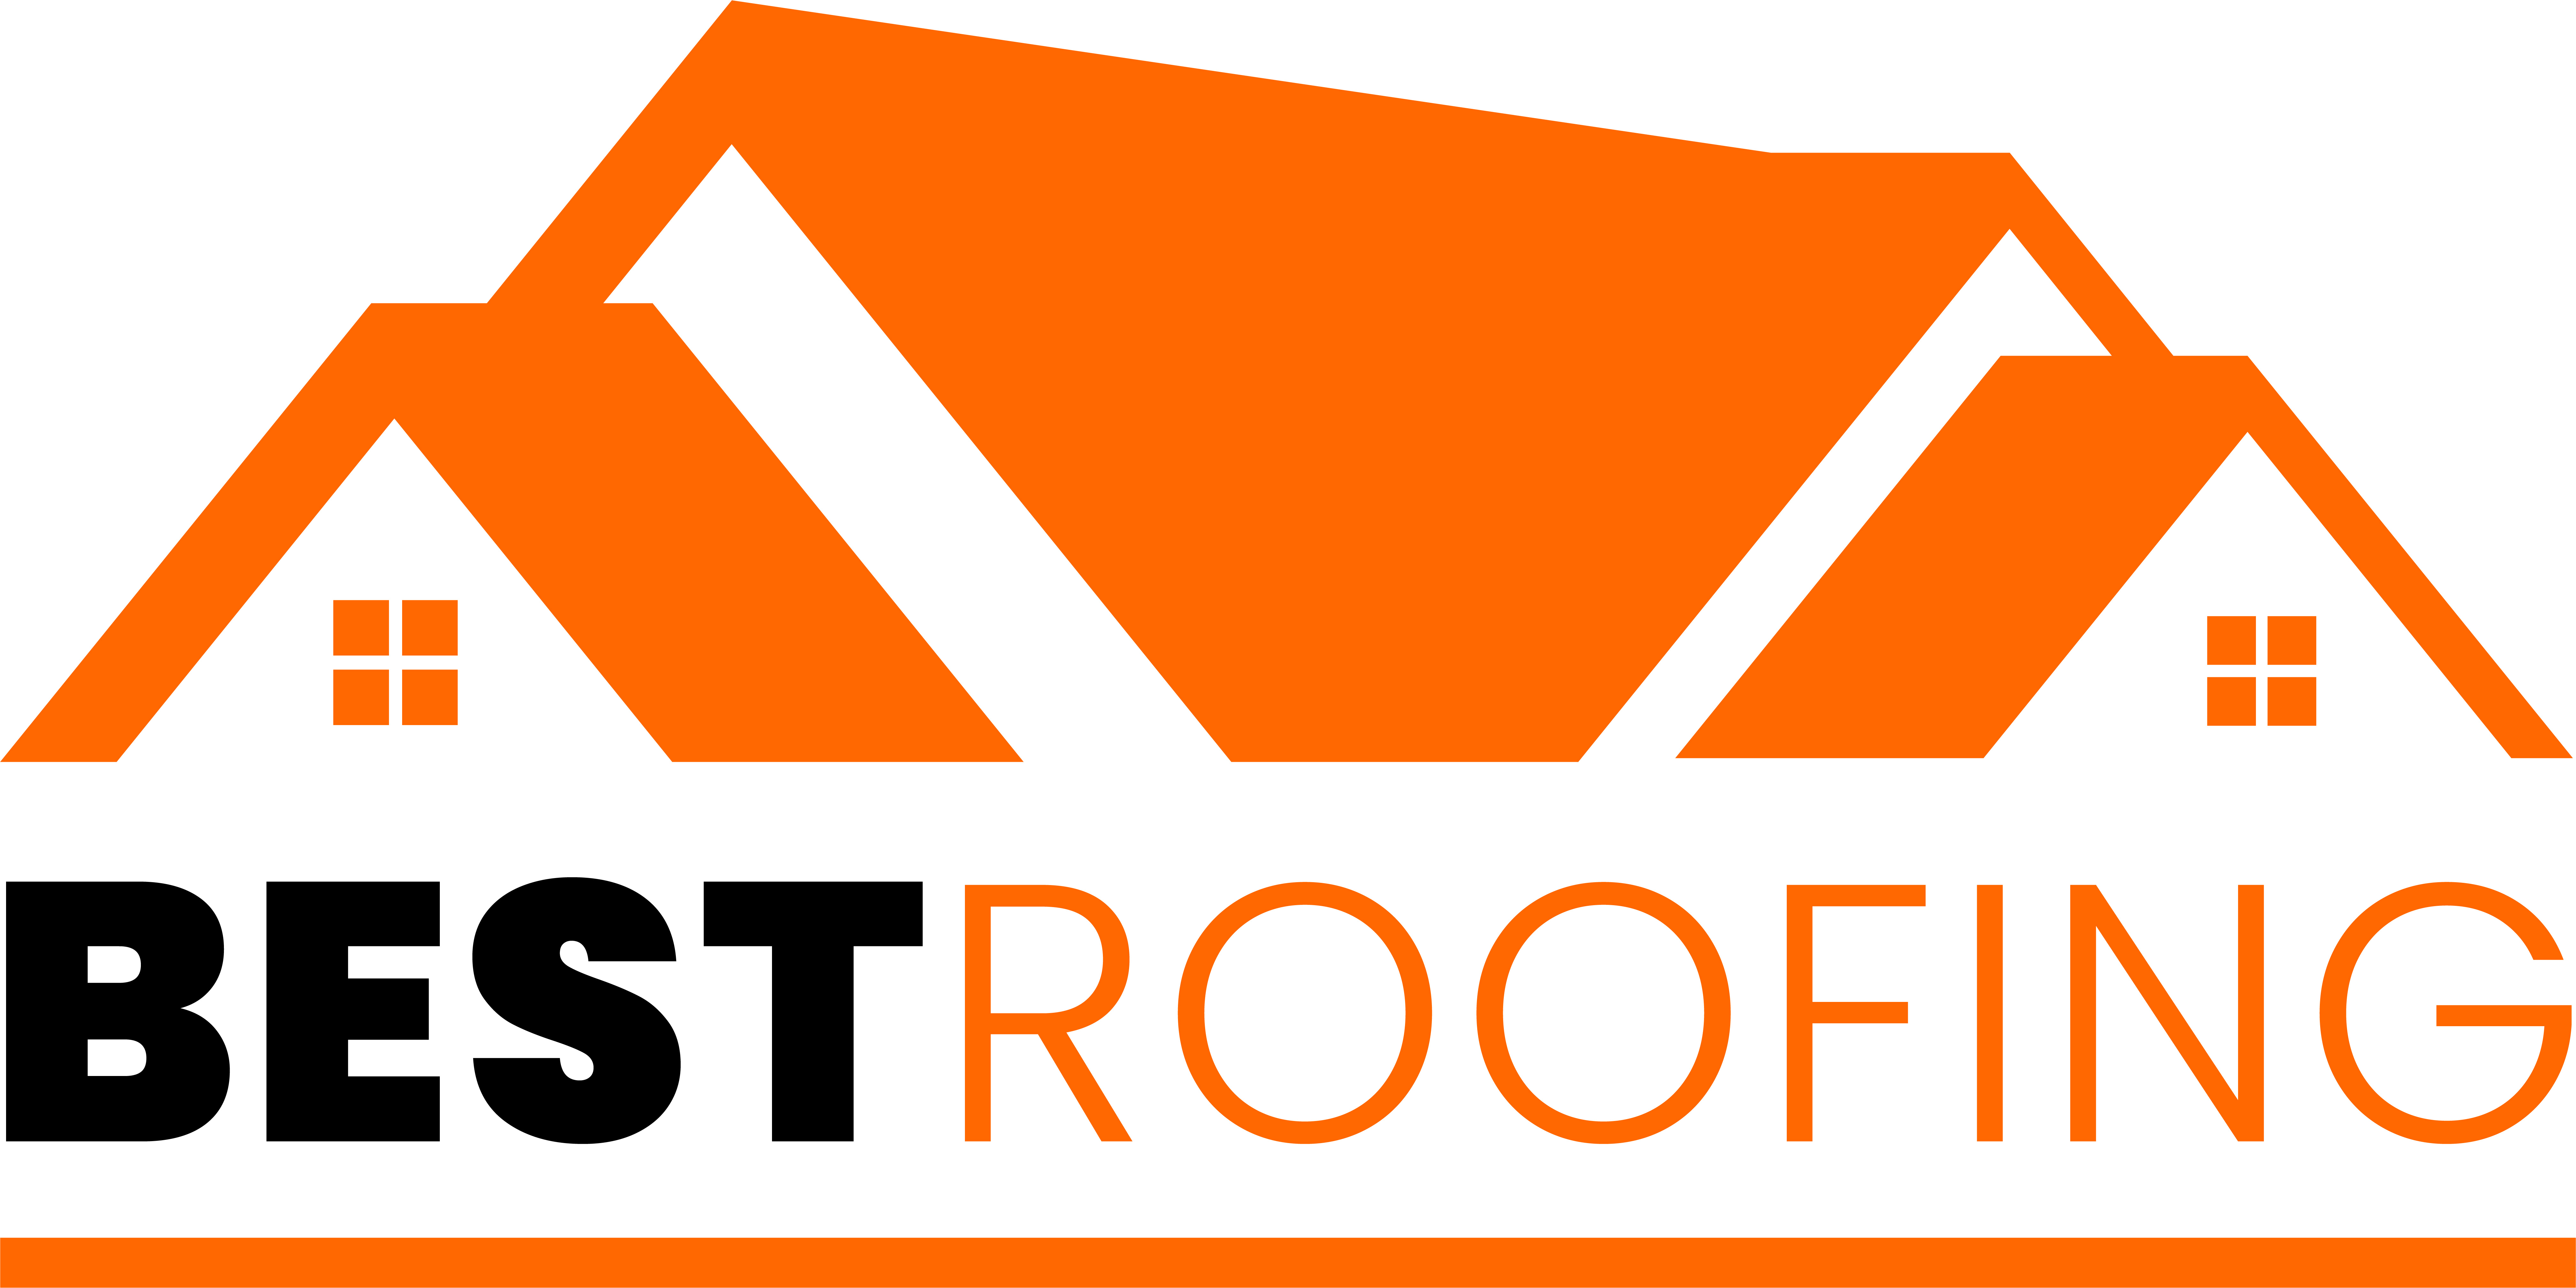 Best Roofing Partners Up with Wells Fargo Home Projects To Offer Easy Financing Options